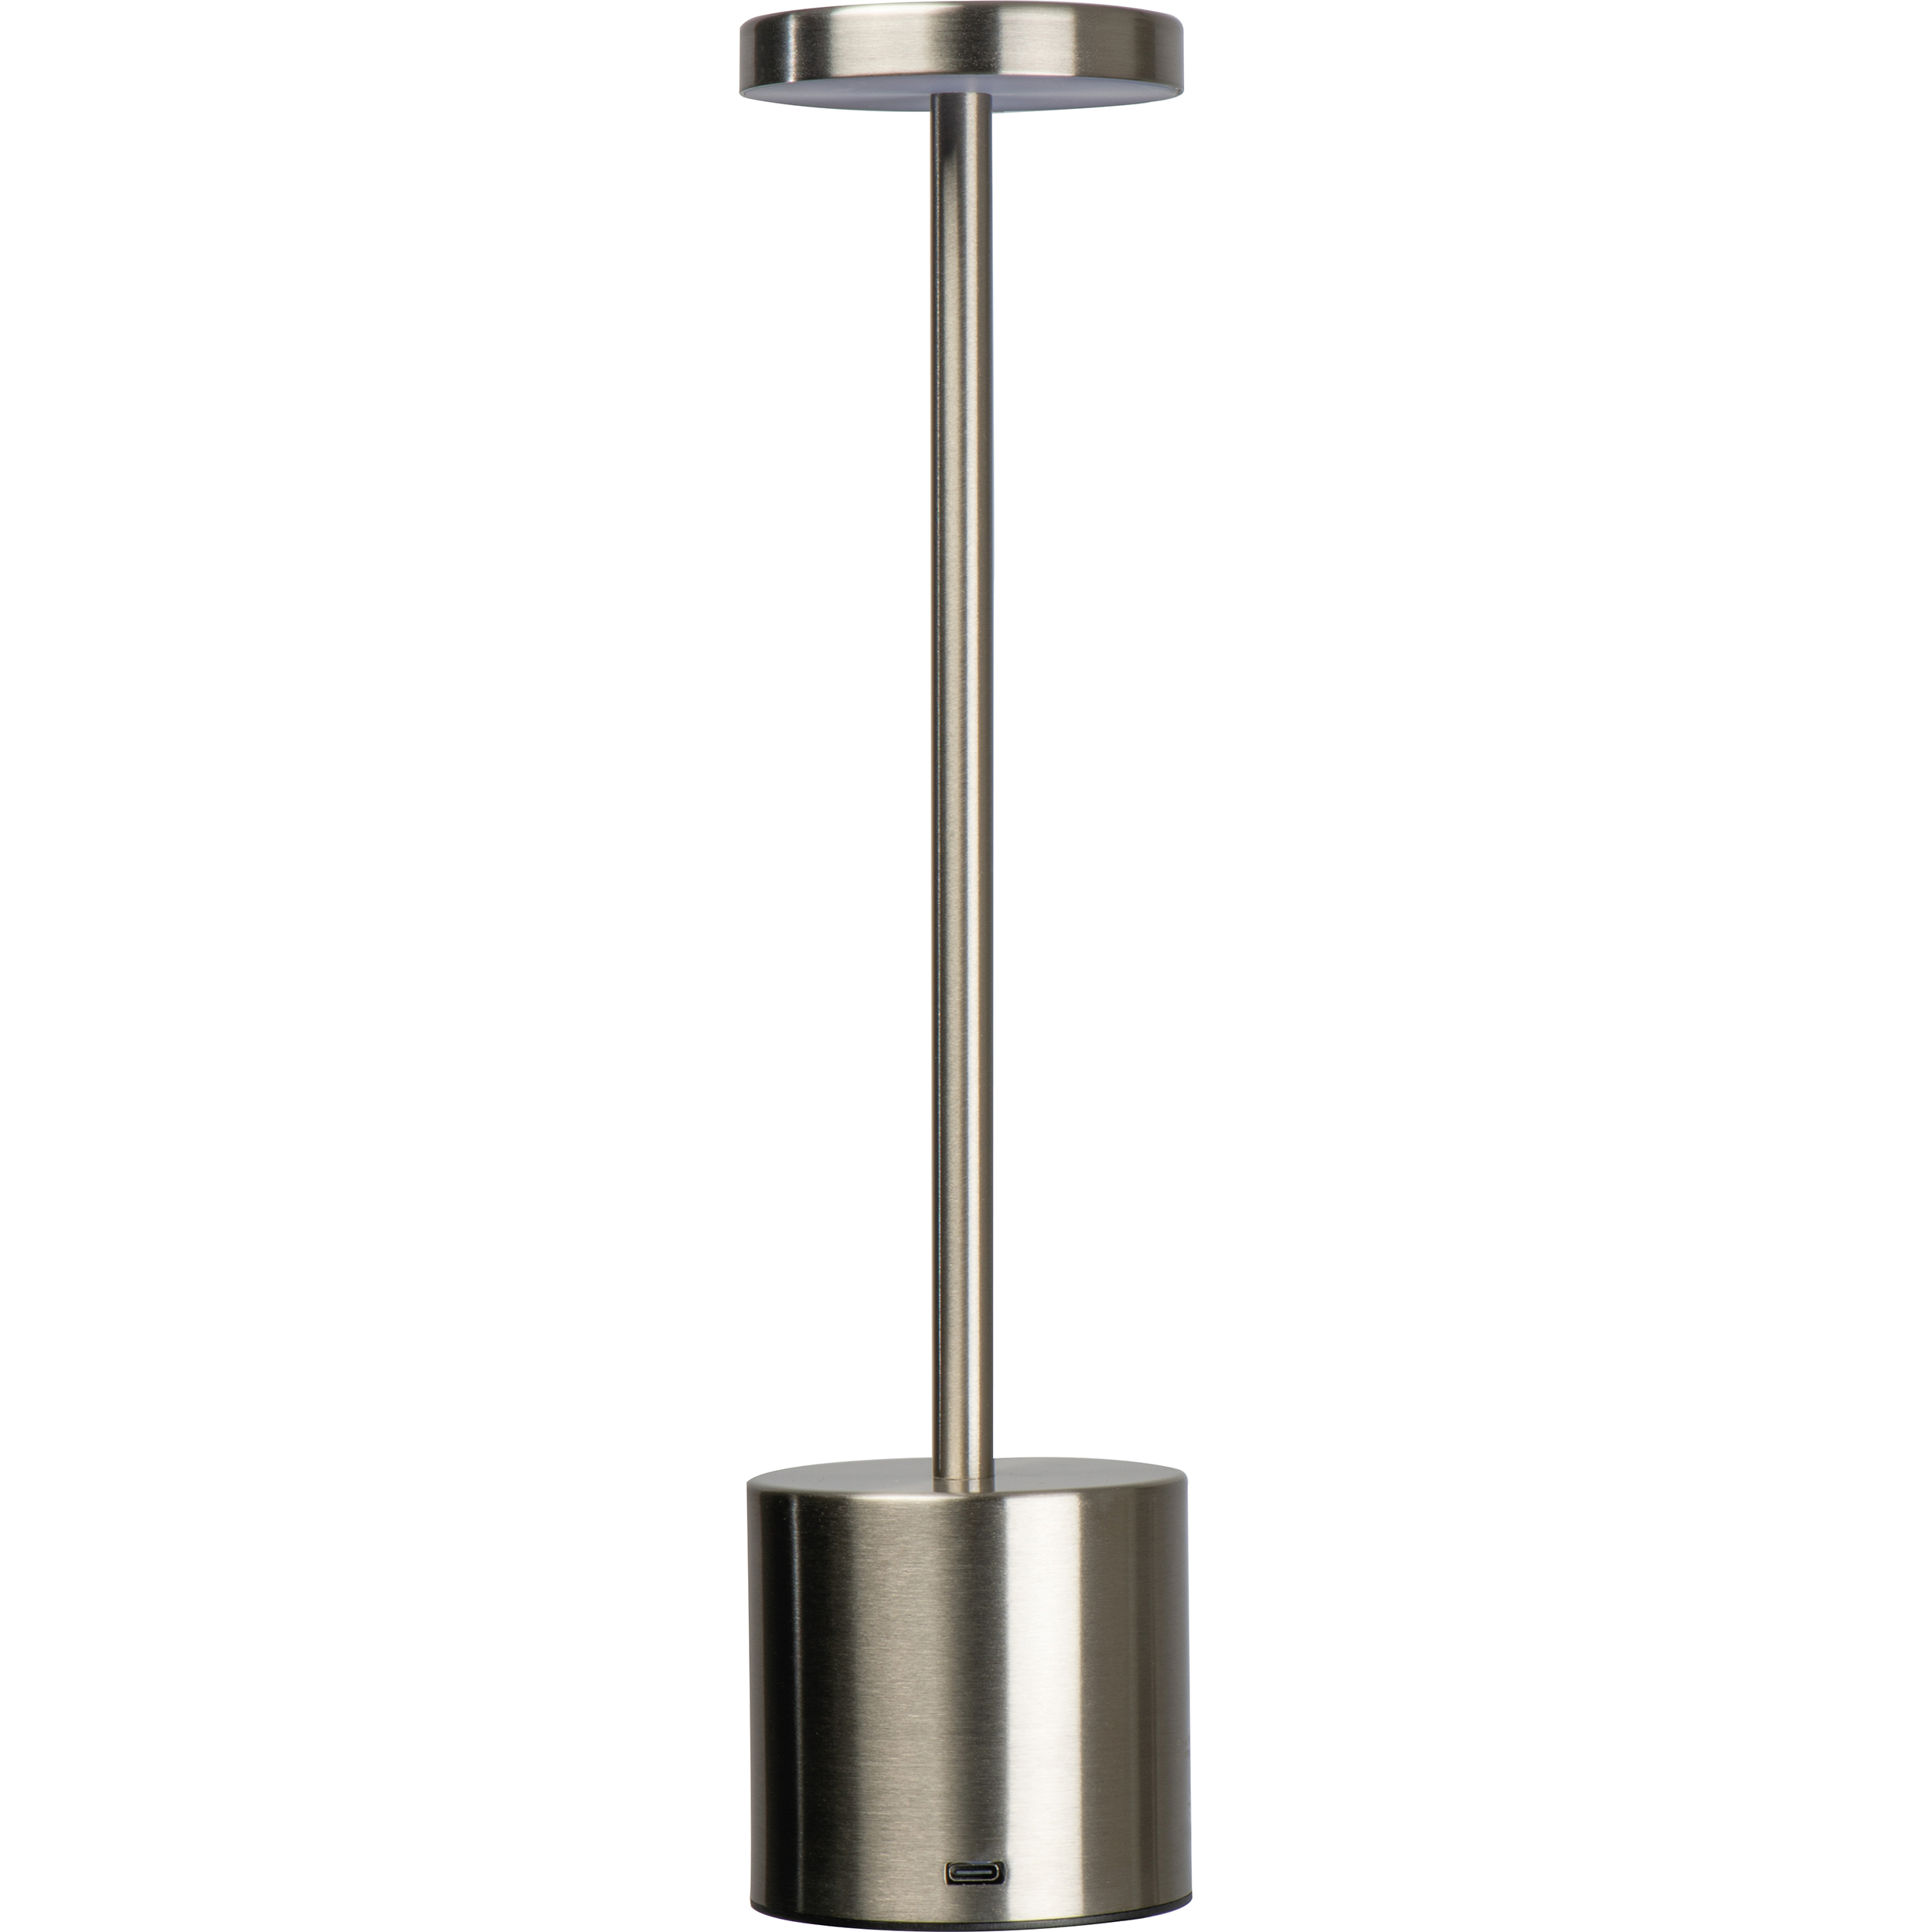 Stainless steel table lamp with rechargeable battery